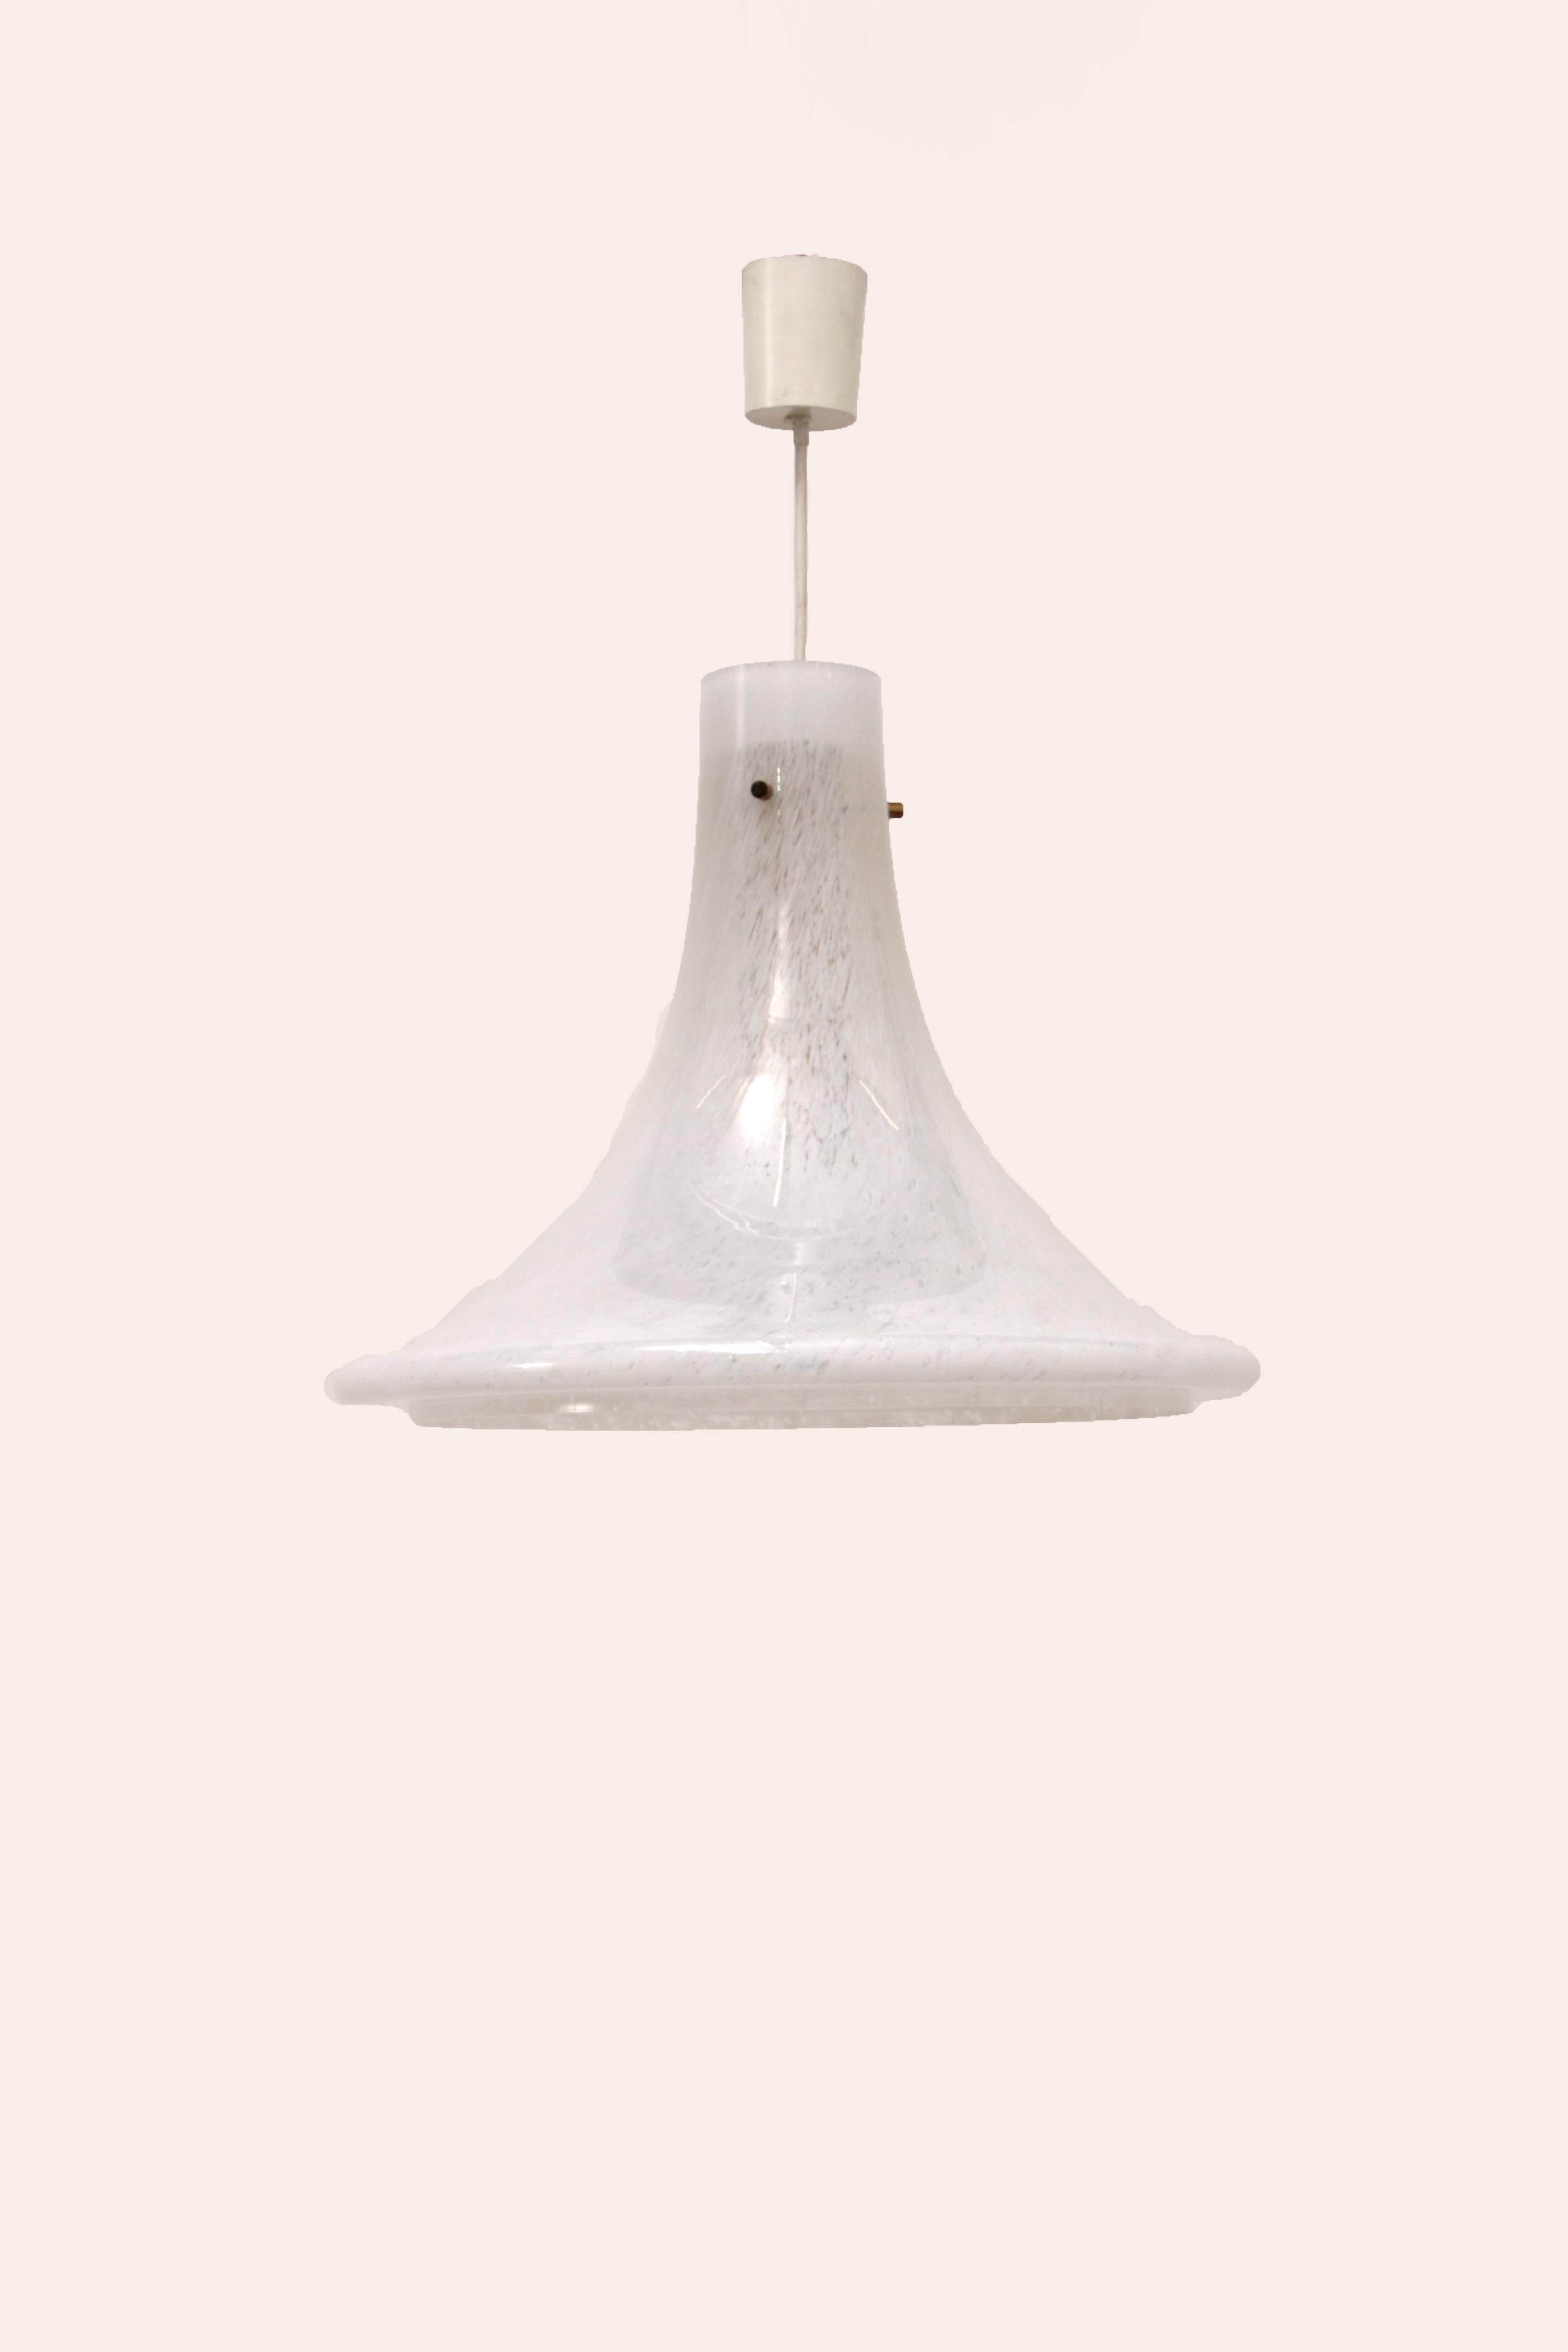 This Murano glass pendant lamp was designed in the 1970s. It was produced by Glashütte Limburg in Germany. The light is beautifully filtered through the Murano glass. The Murano glass hanging lamp has a minimalist design. The condition of this